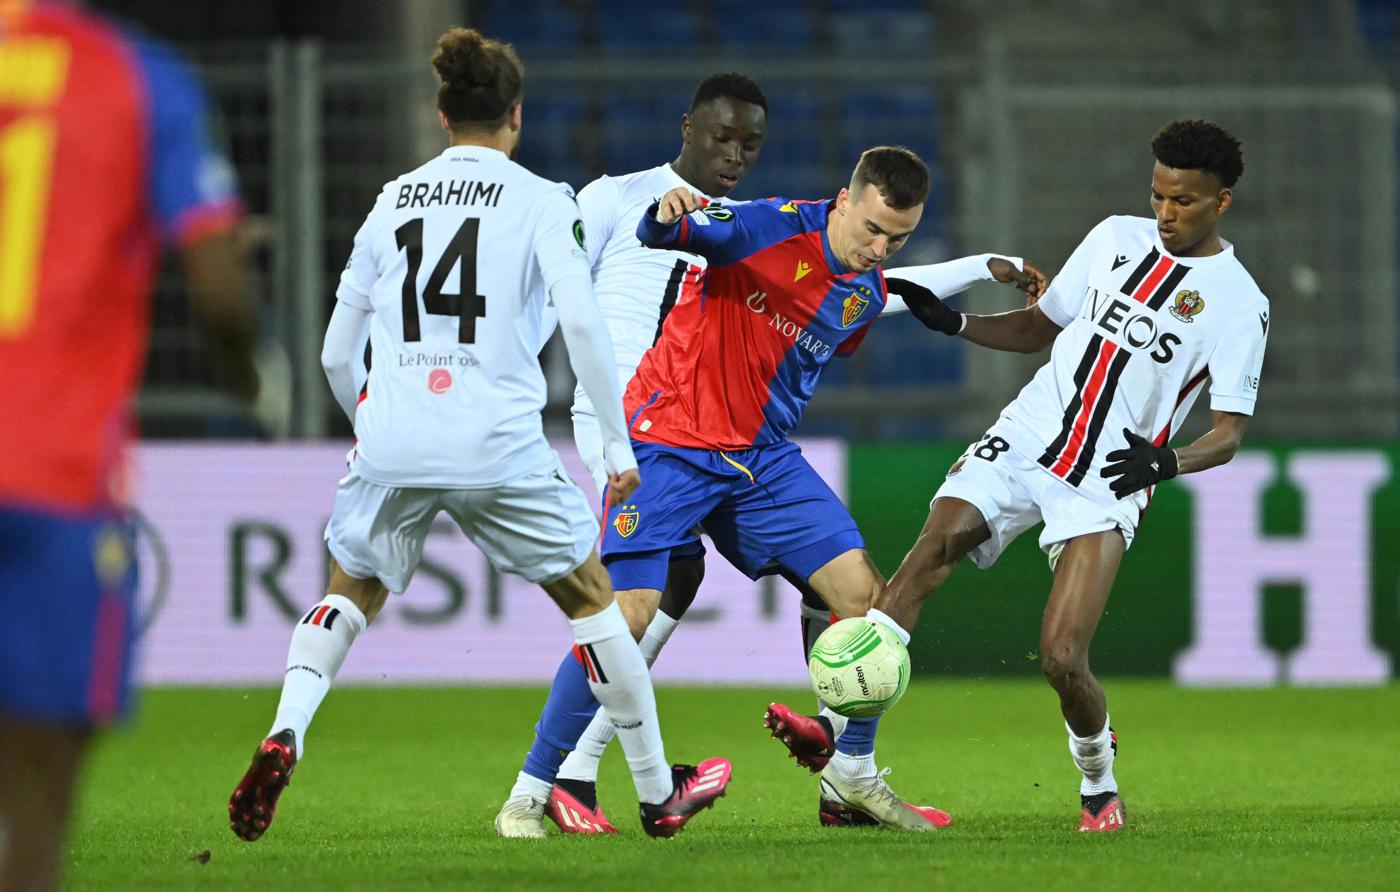 Basel - Nice - 2:2. Conference League. Match review, statistics